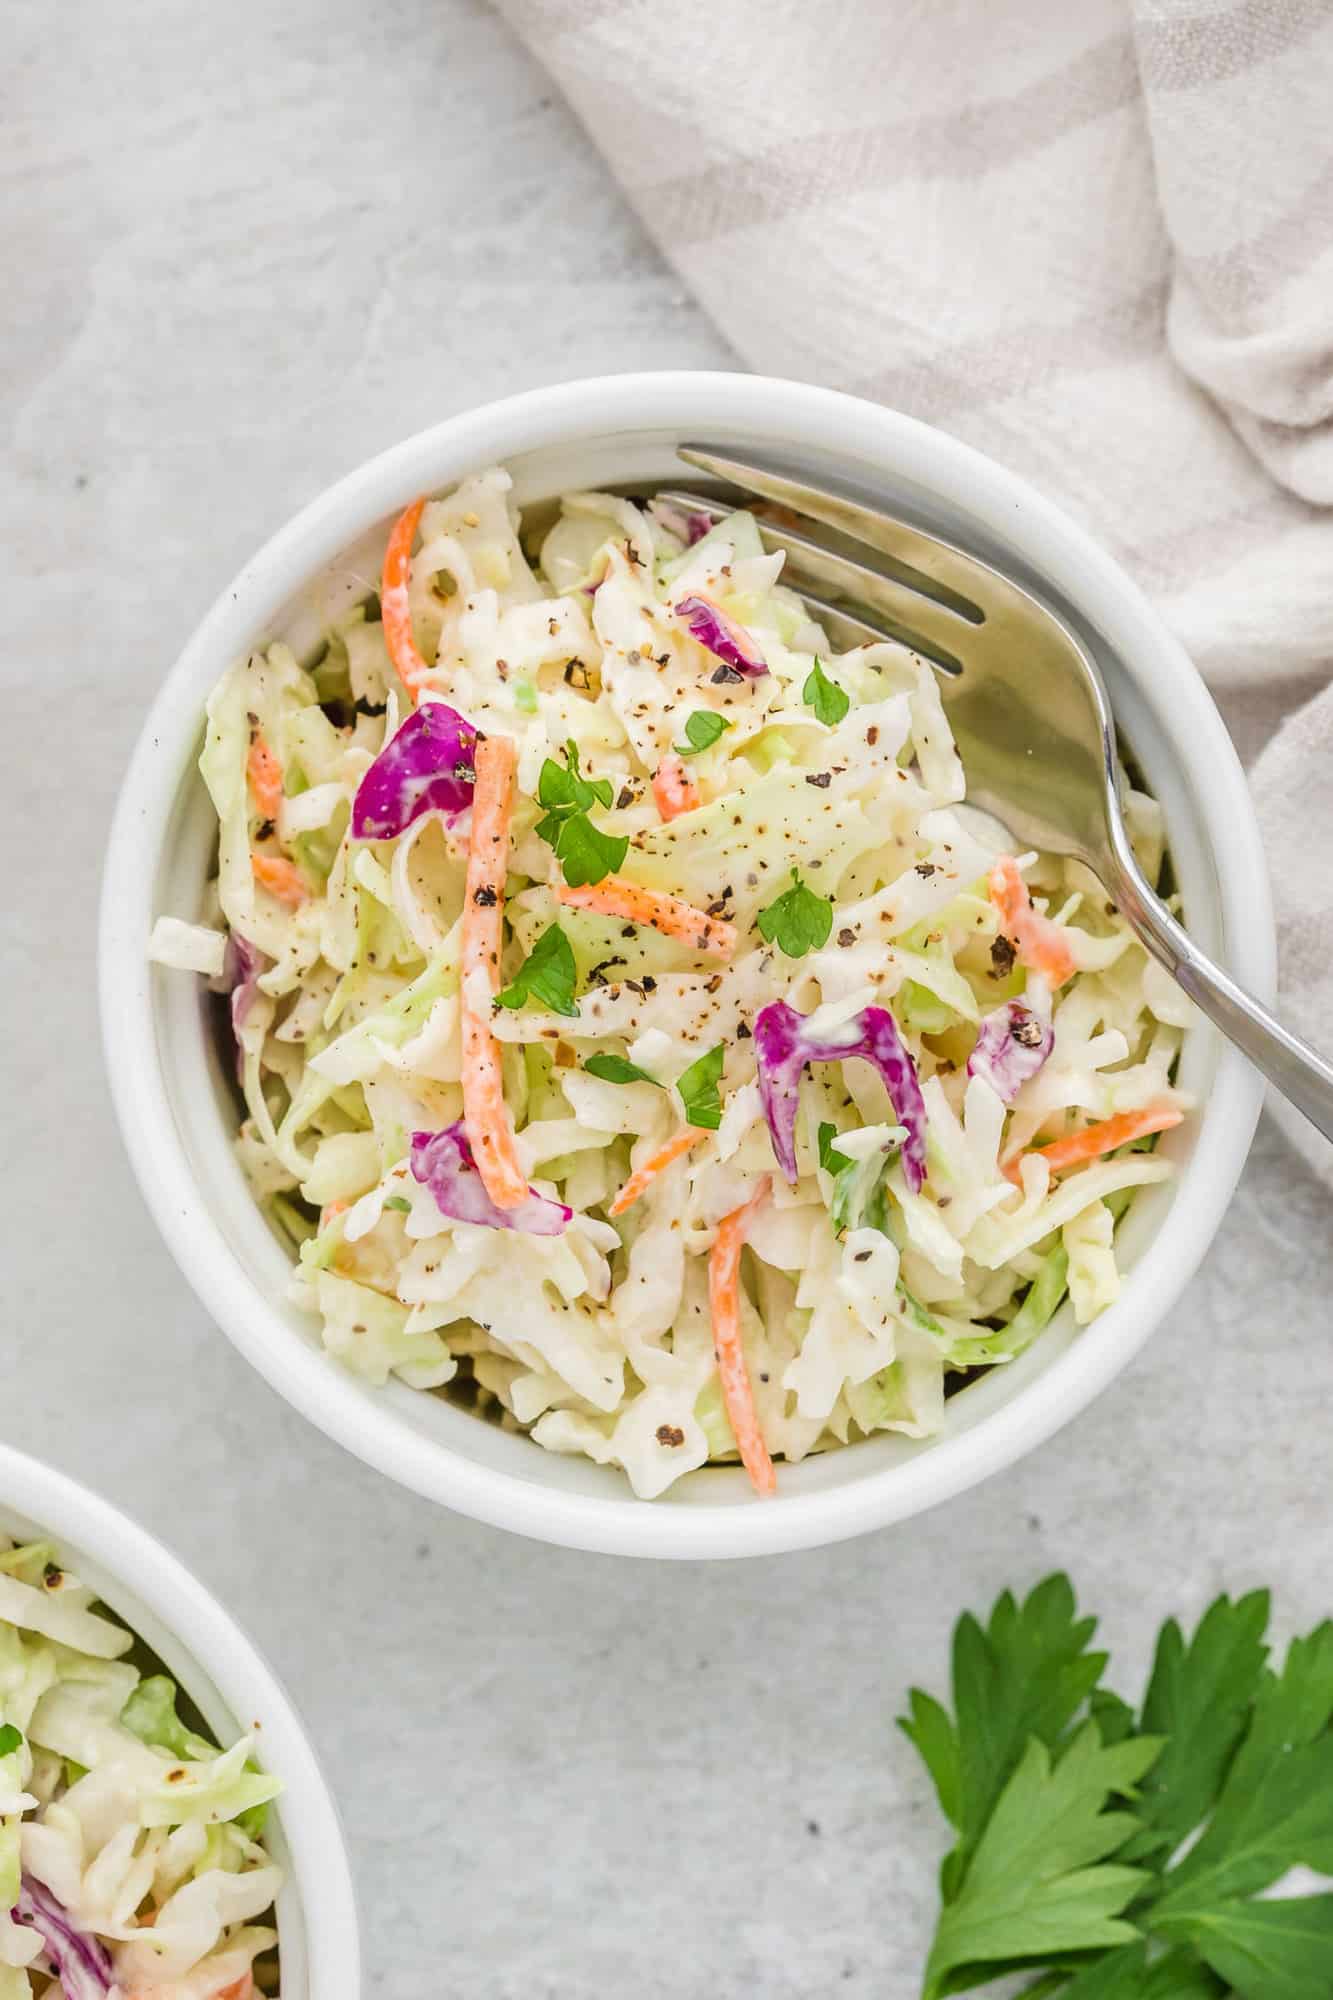 Overhead view of healthy coleslaw in a small round bowl.